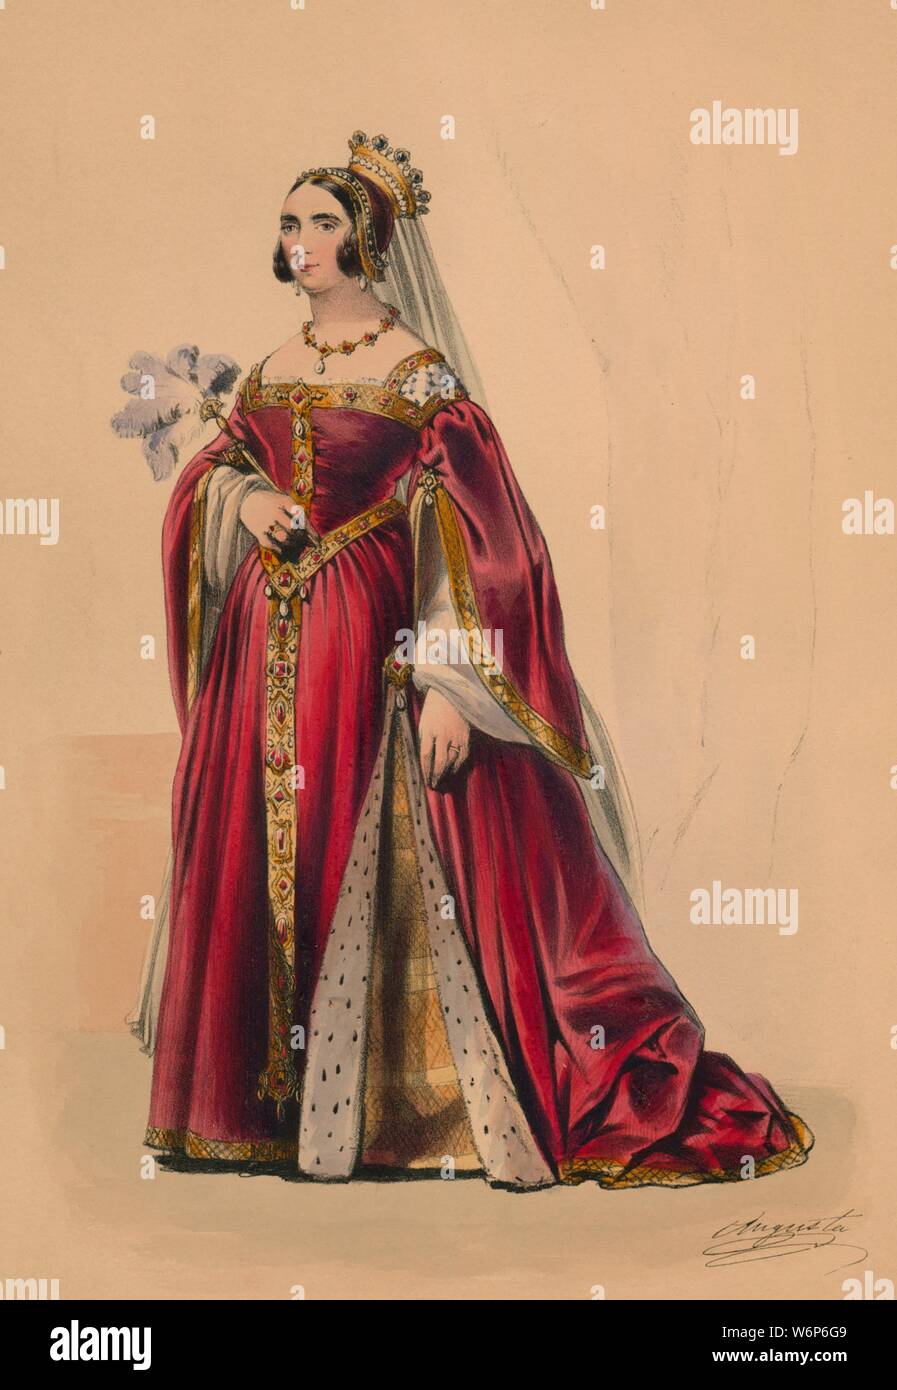 Guest in costume for Queen Victoria's Bal Costum&#xe9;, May 12 1842, (1843). Guest, possibly Princess Augusta of Saxe-Weimar-Eisenach (1811-1890), wearing a crown, a jewelled and fur-trimmed dress, and holding an ostrich-feather fan. Members of the Royal Household were expected to wear dress of the Plantagenet period (c1154-1485), although other guests could wear costumes of their own choosing. The costumes were designed under the supervision of James Robinson Planch&#xe9; and were specifically intended to give work to the declining Spitalfields silk industry. The ball of 1842, held at Bucking Stock Photo